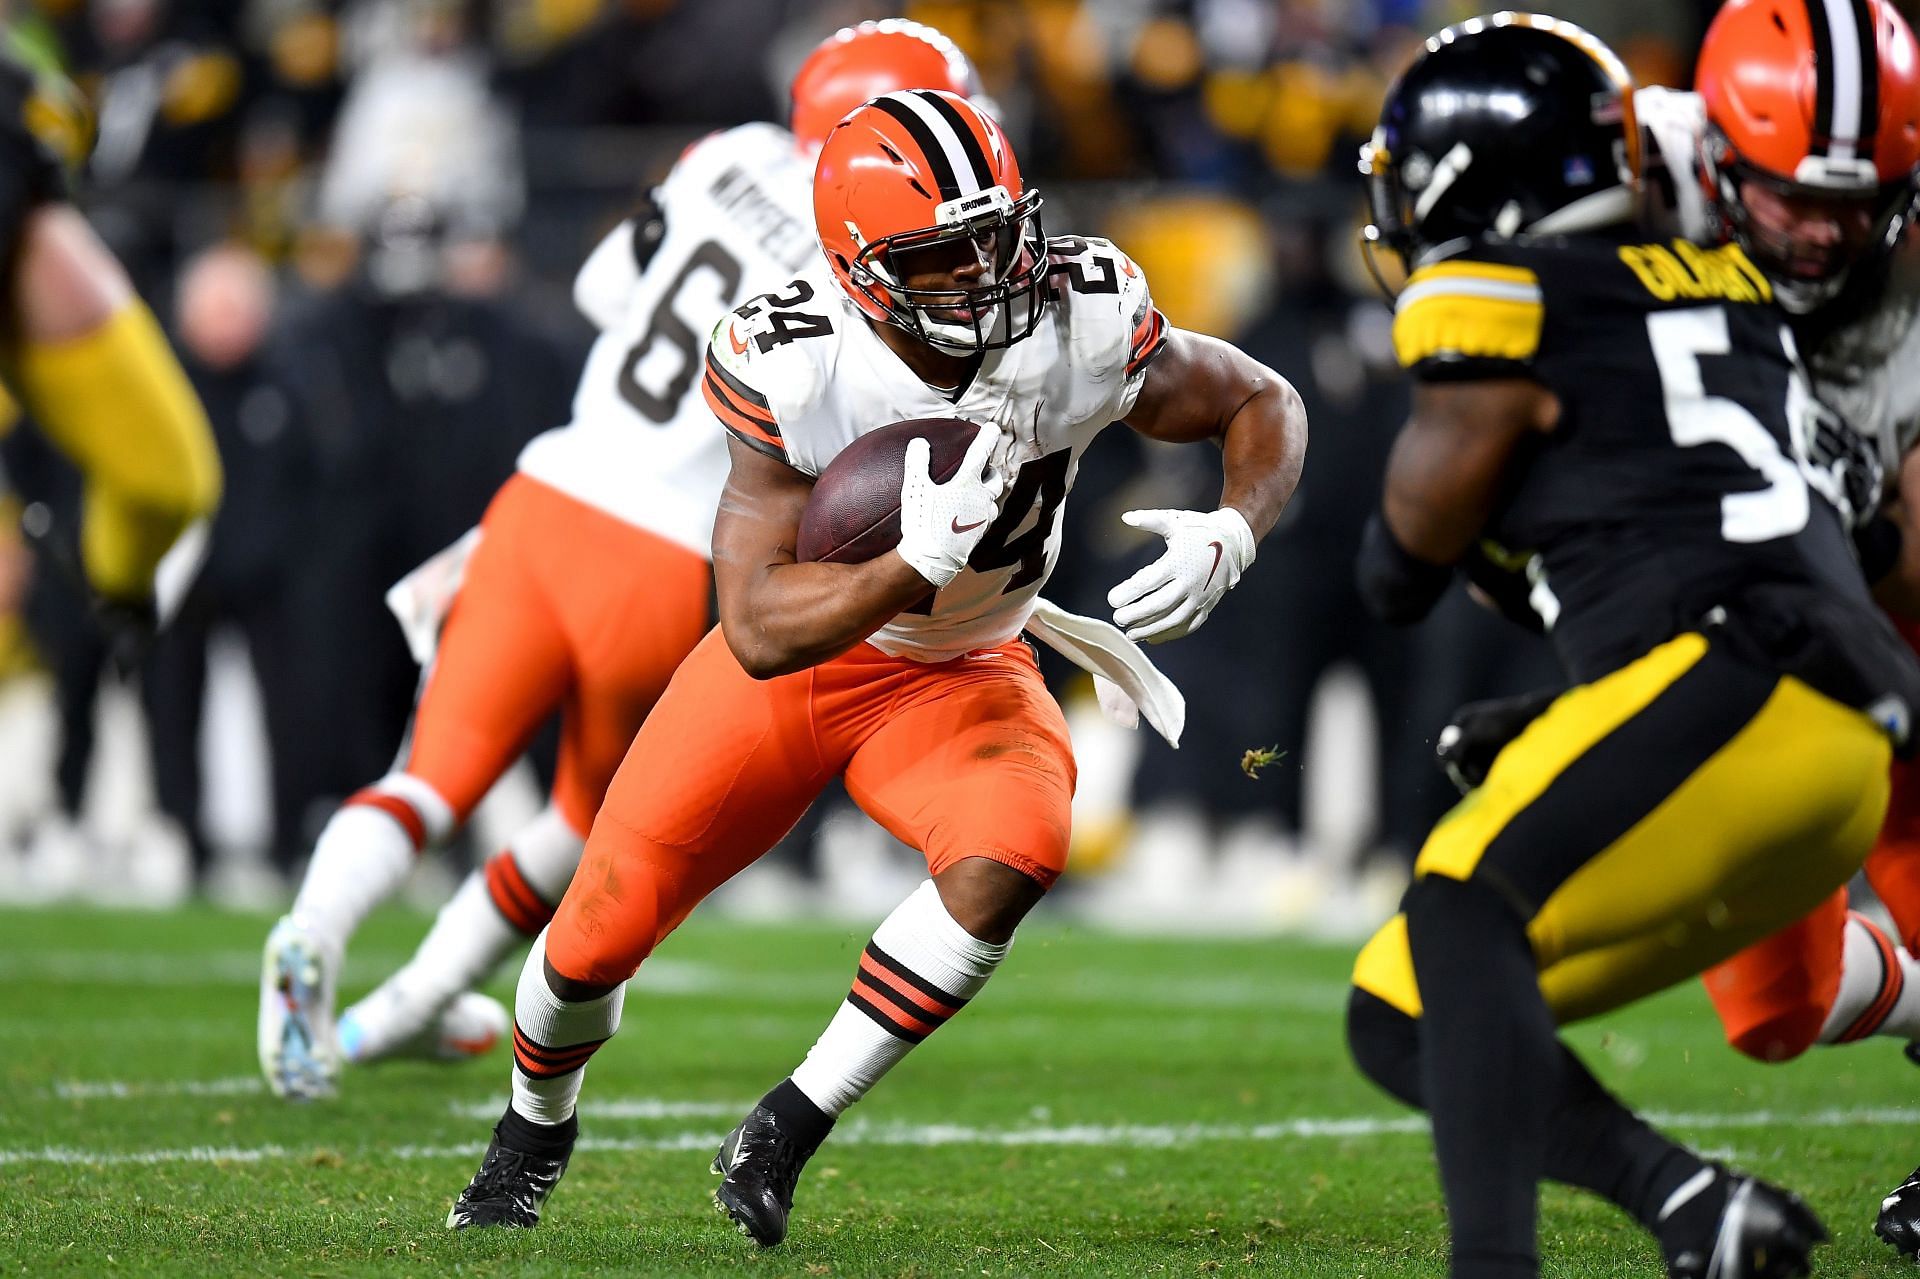 Nick Chubb in action in the Cleveland Browns v Pittsburgh Steelers game